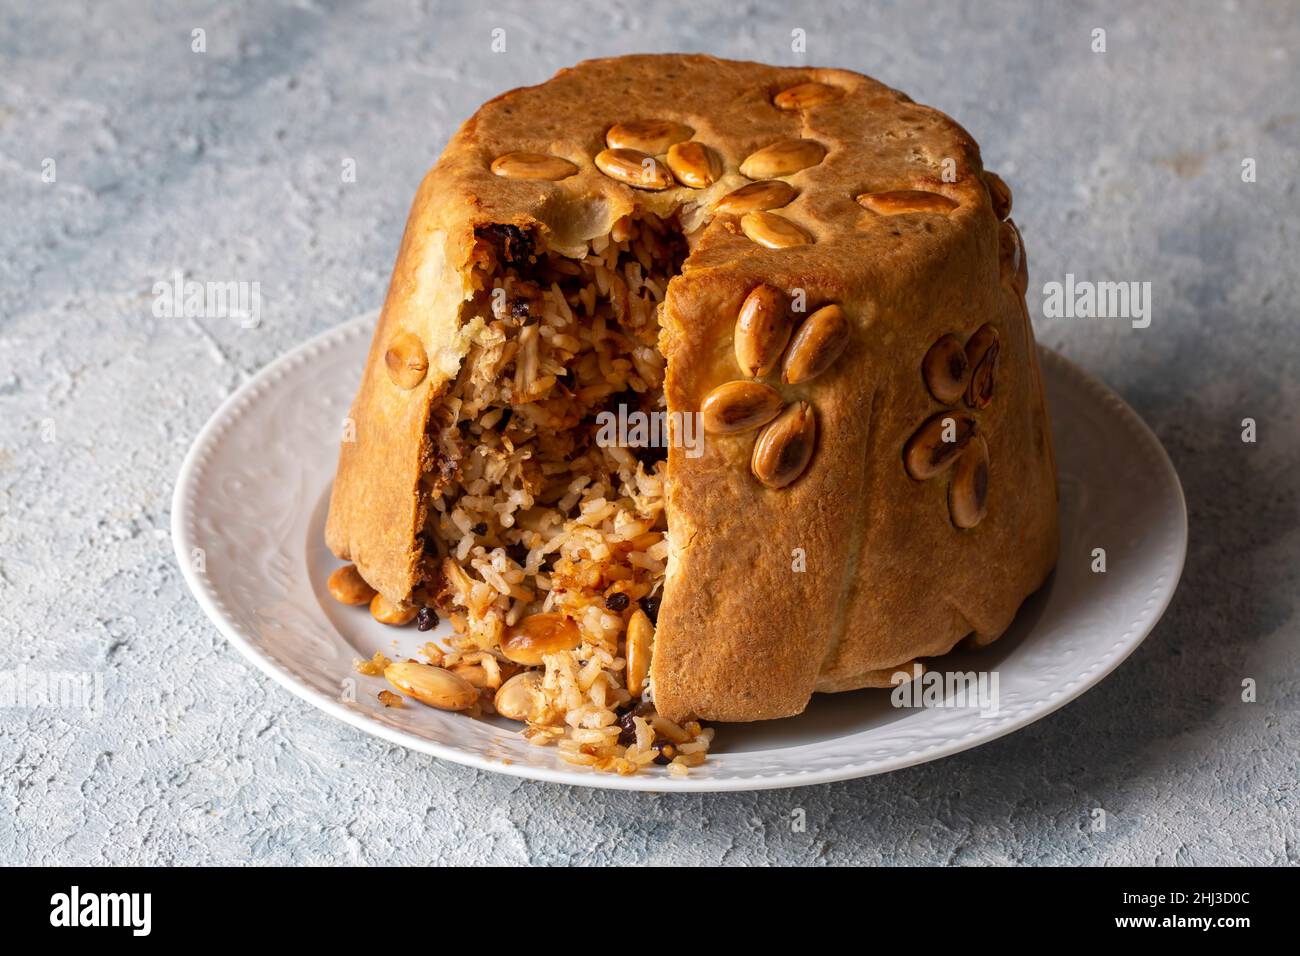 Turkish Perde Pilavi. Drape pilaf with chicken, almond and raisin. A local flavor Rice from Siirt region (Turkish name; Siirt perde pilavi) Stock Photo